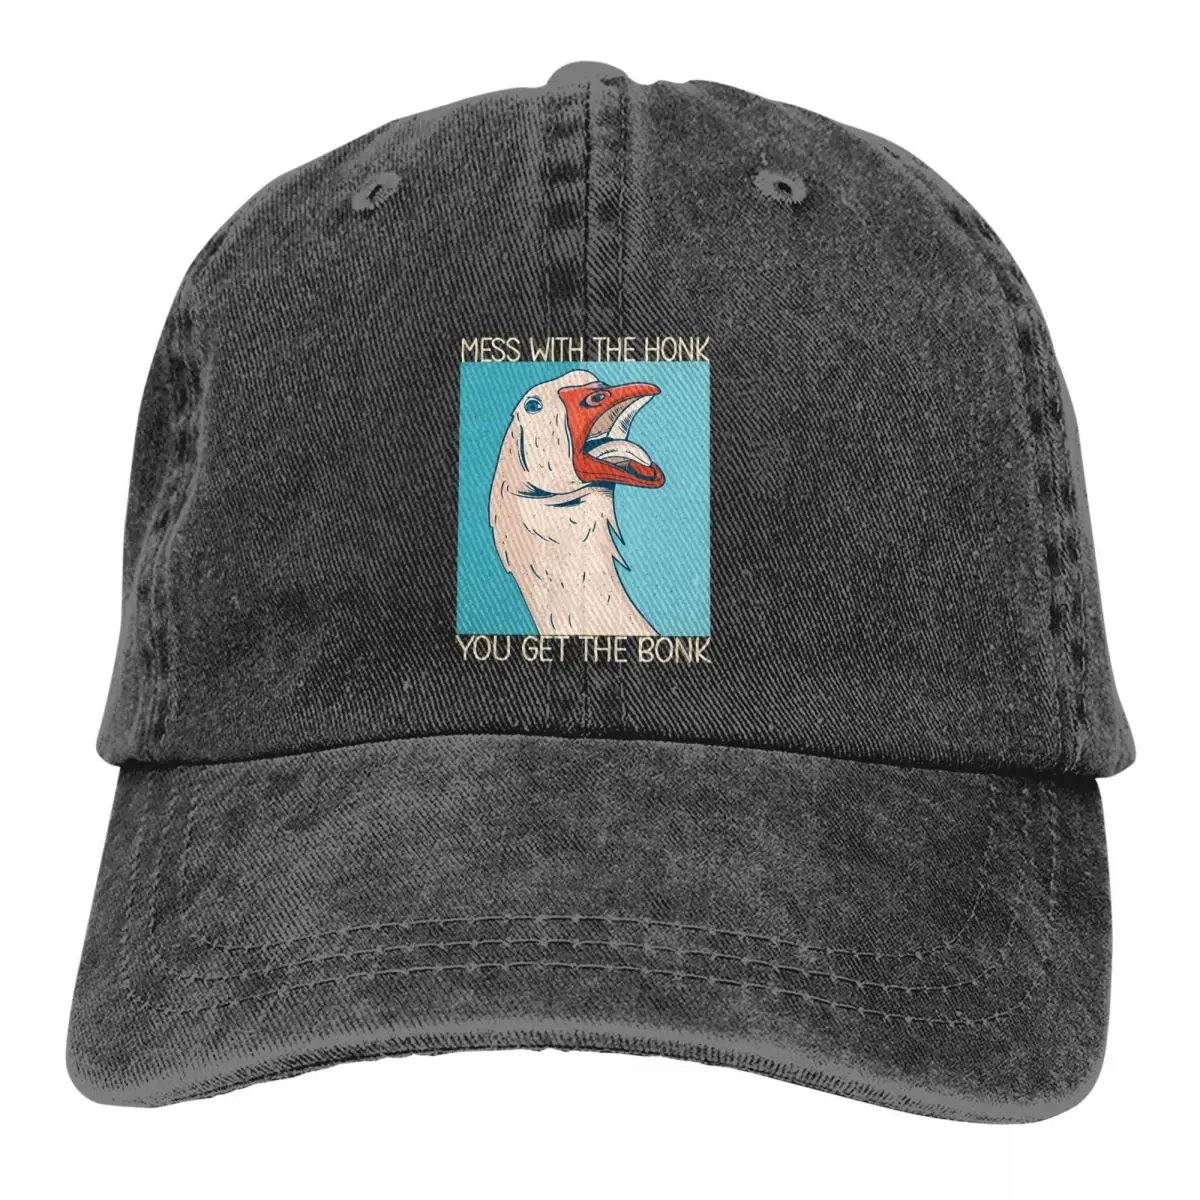 

Washed Men's Baseball Cap Mess You Get The Bonk Classic Trucker Snapback Caps Dad Hat Untitled Goose Game Honk Golf Hats